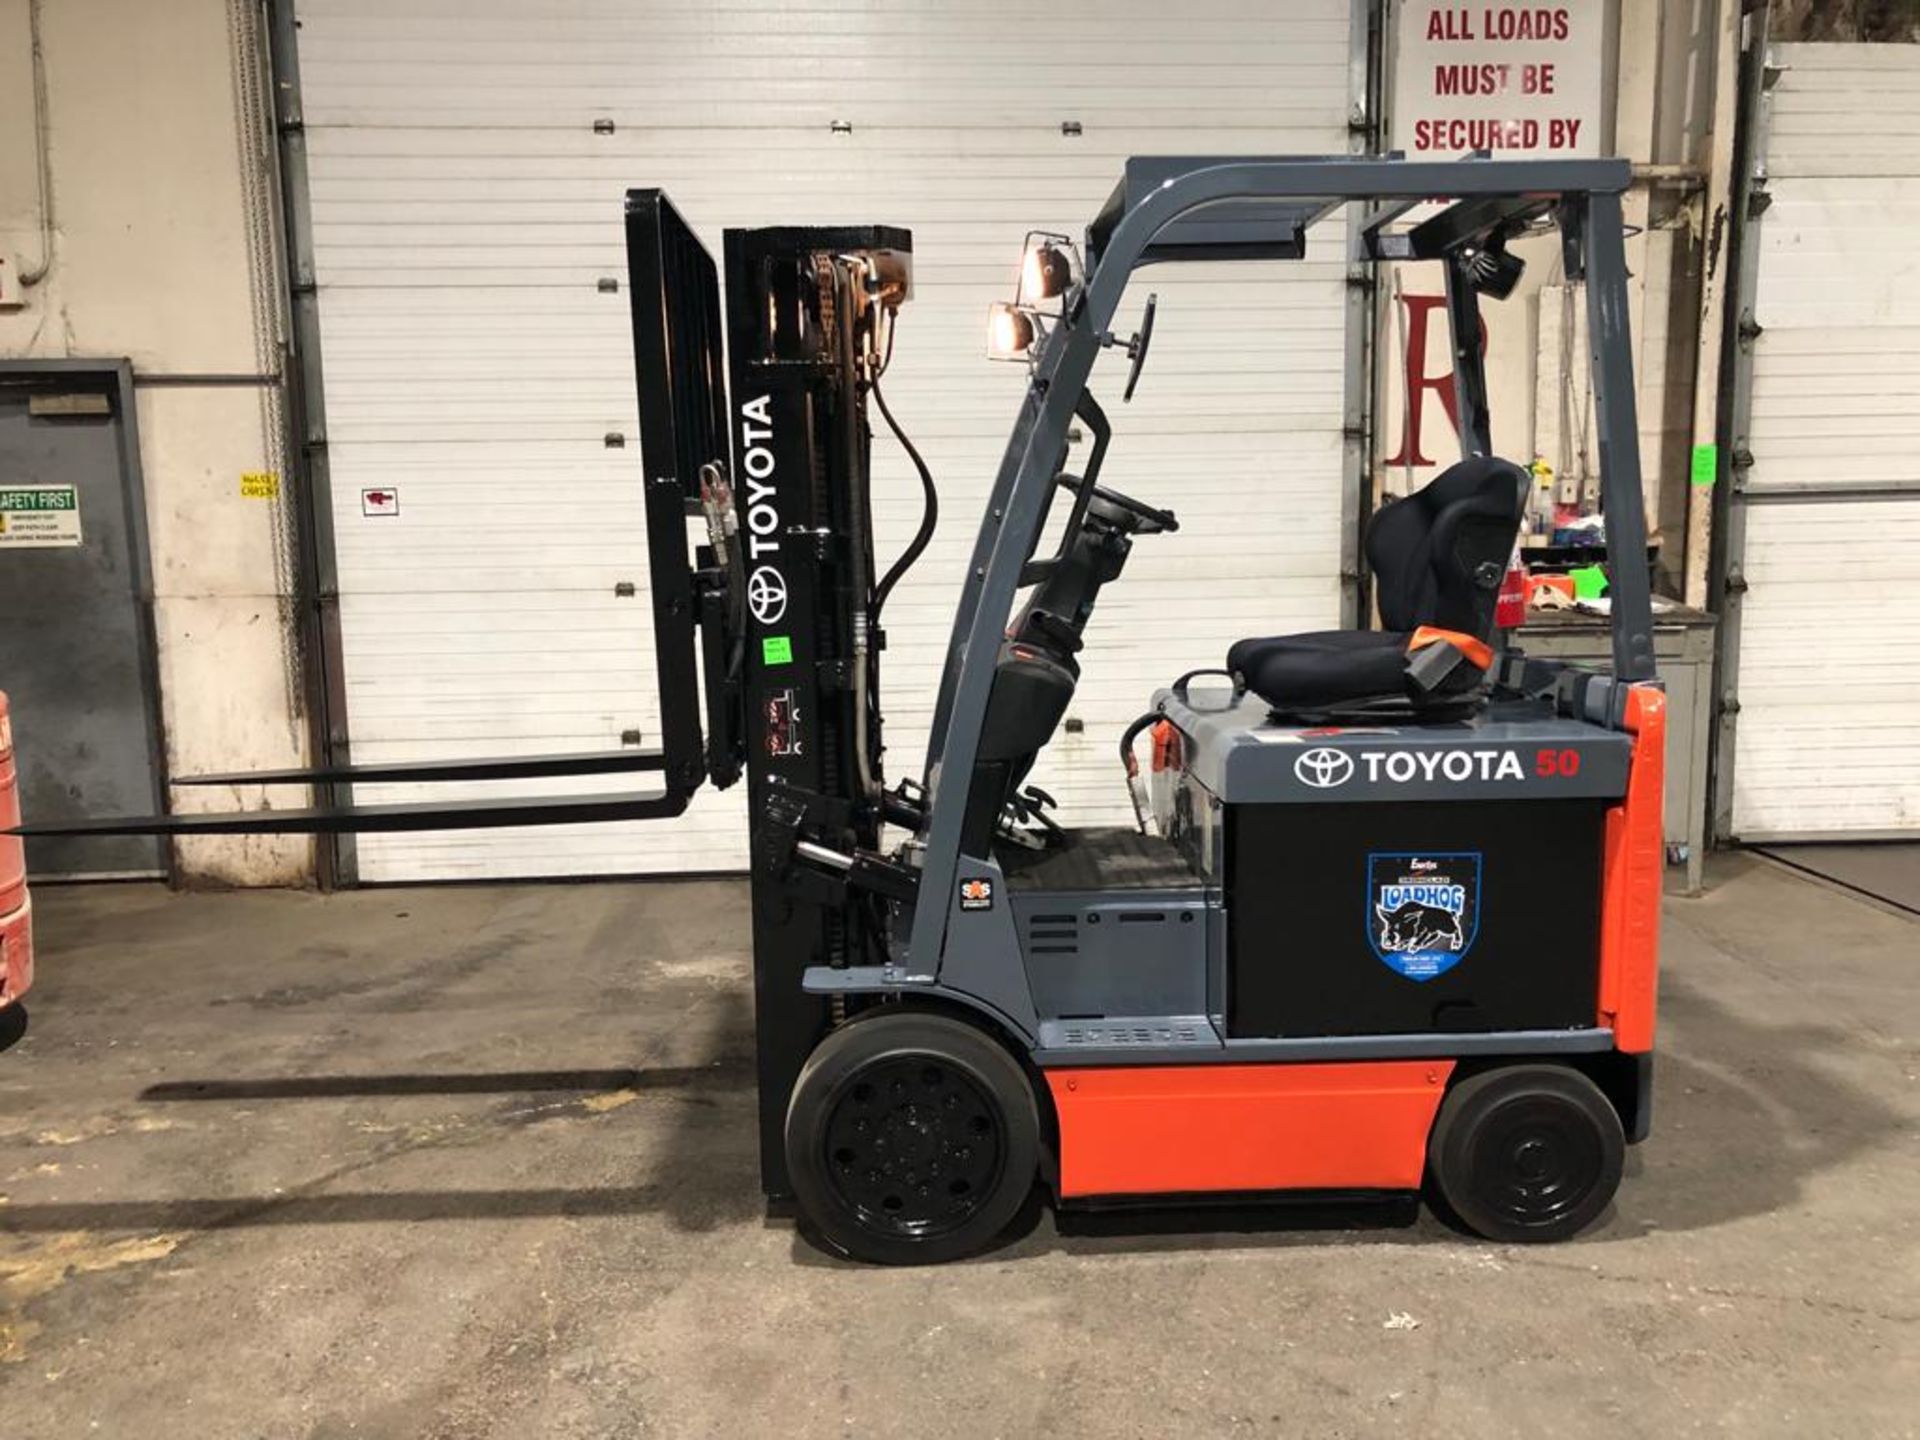 2016 Toyota 5,000lbs Capacity Forklift Electric with Sideshift and 3-stage Mast 36V - FREE CUSTOMS